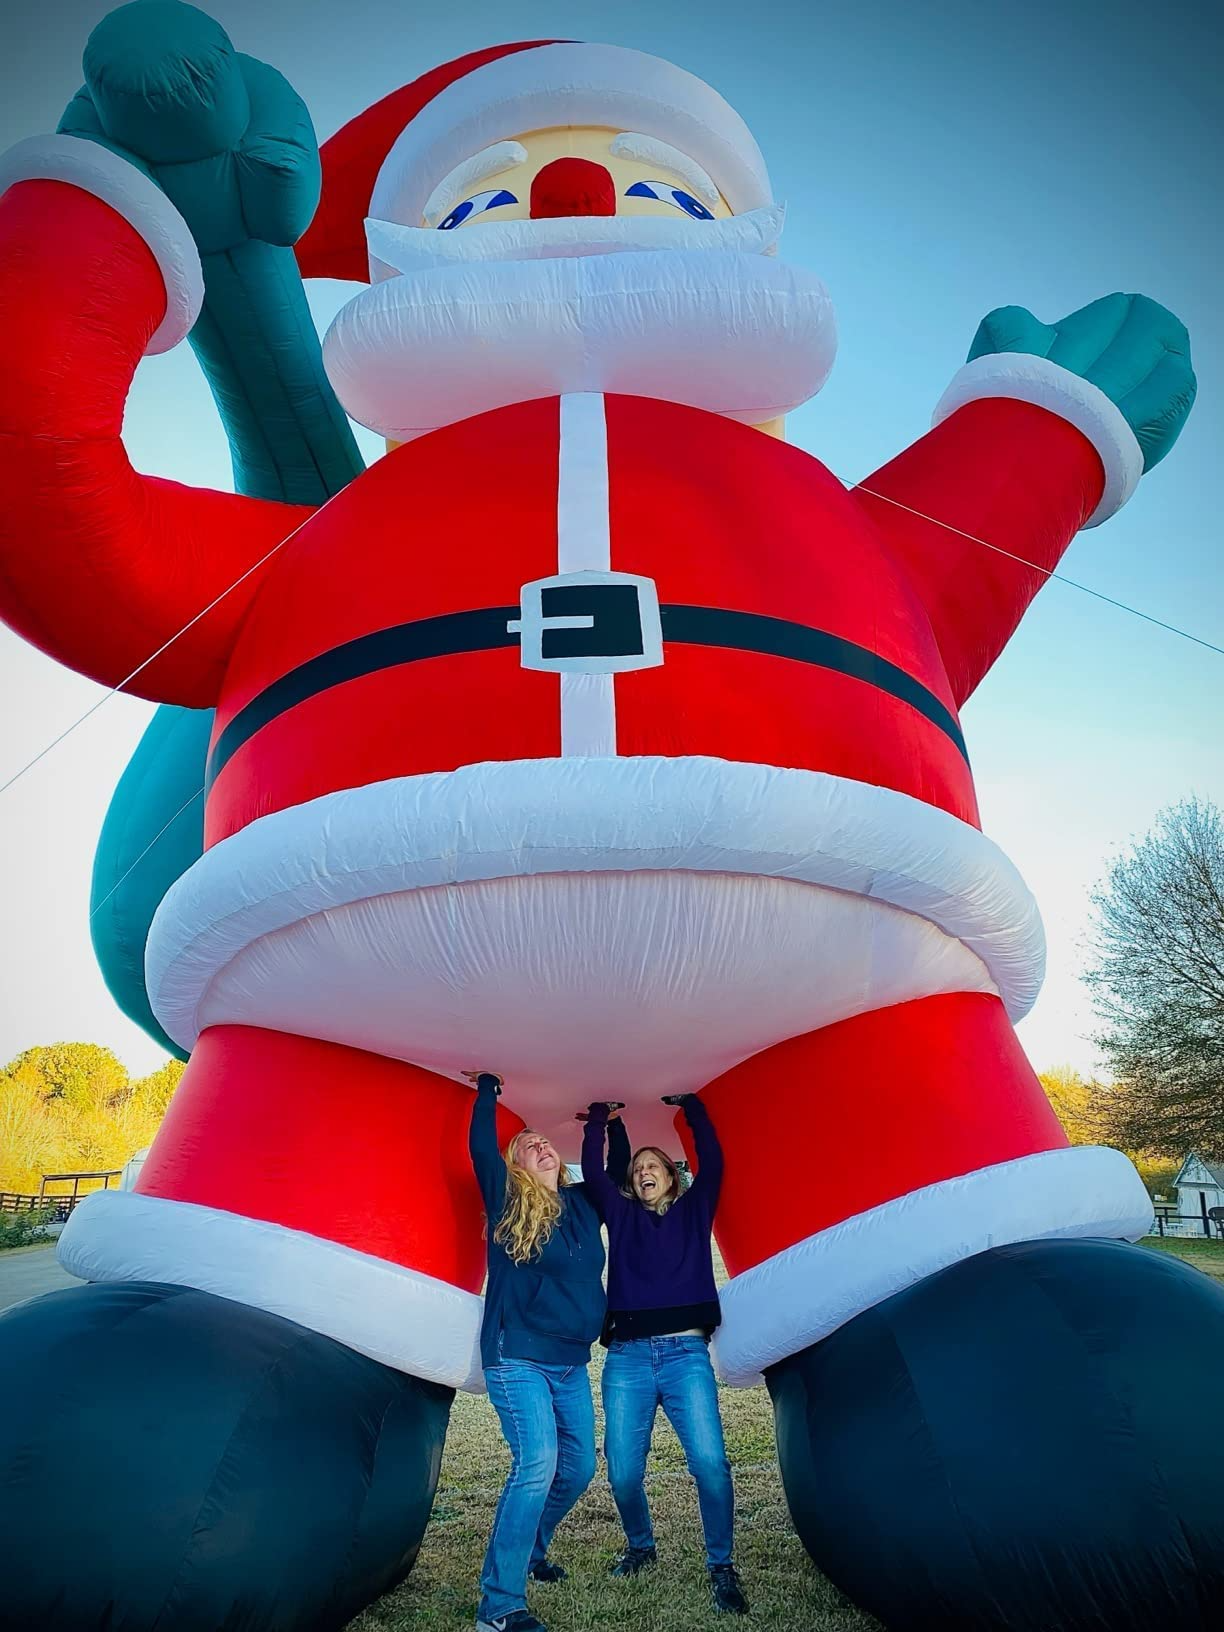 Giant 26Ft Premium Inflatable Santa Claus with Blower for Christmas Yard Decoration Outdoor Yard Lawn Xmas Party Blow Up Decoration with No Light